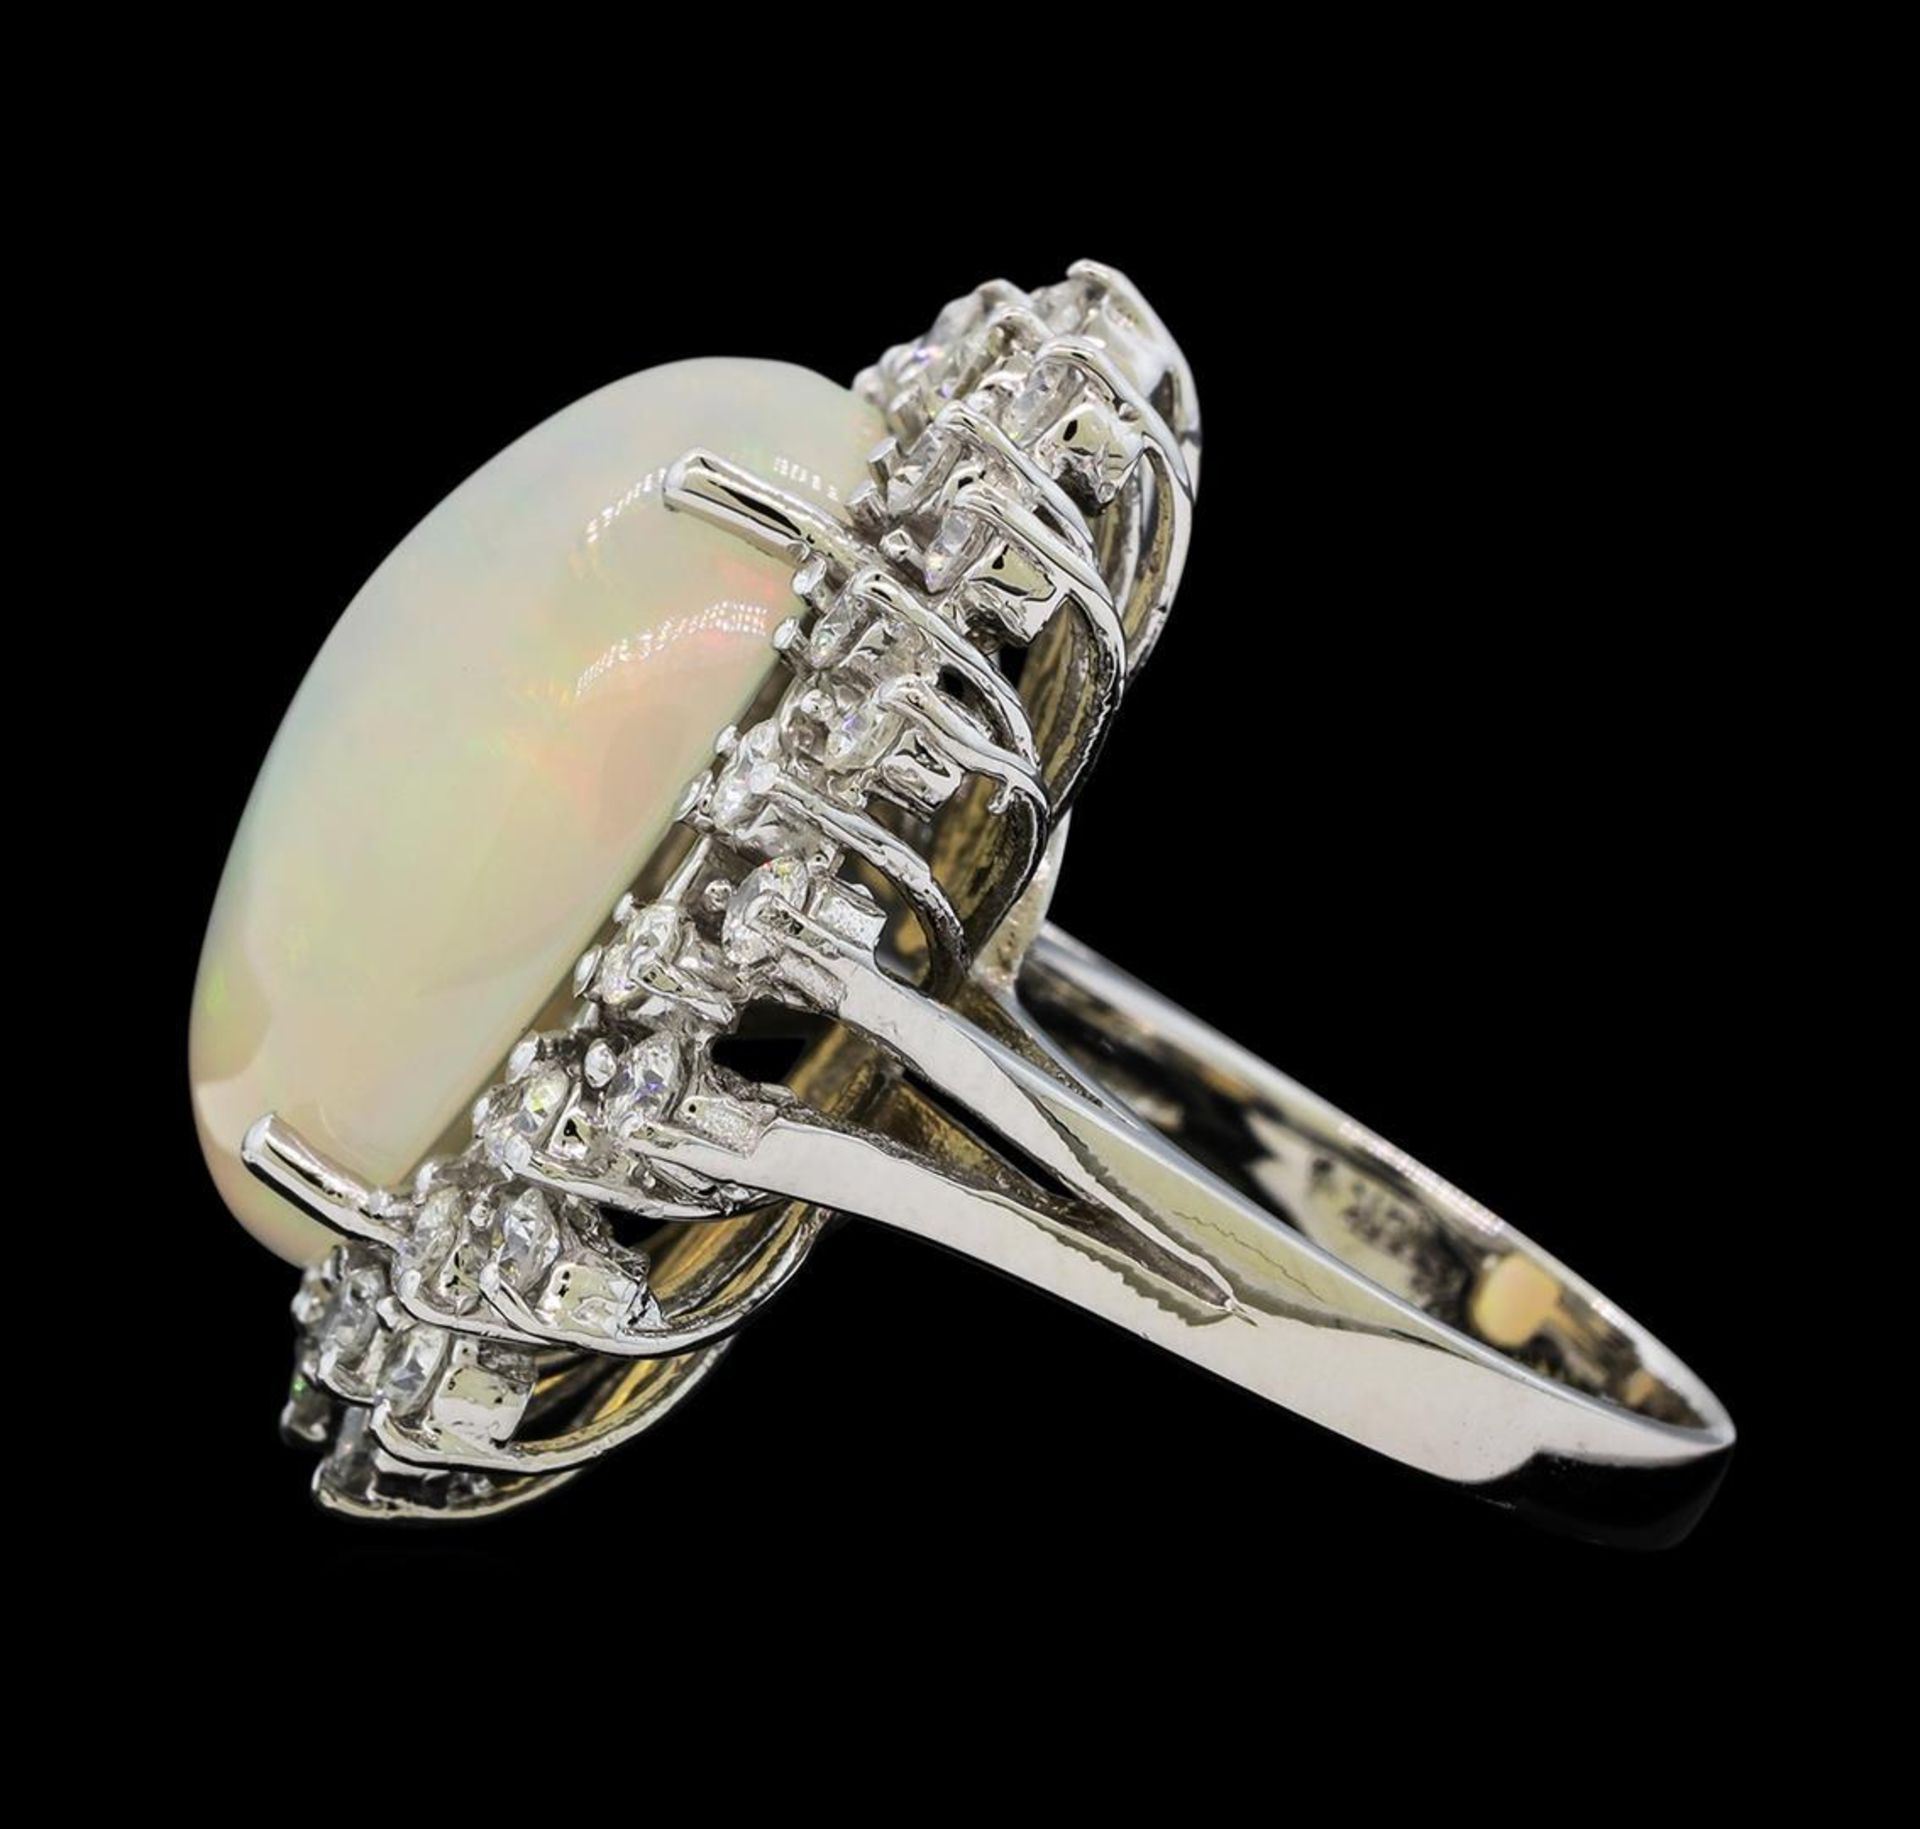 12.57 ctw Opal and Diamond Ring - 14KT White Gold - Image 3 of 5